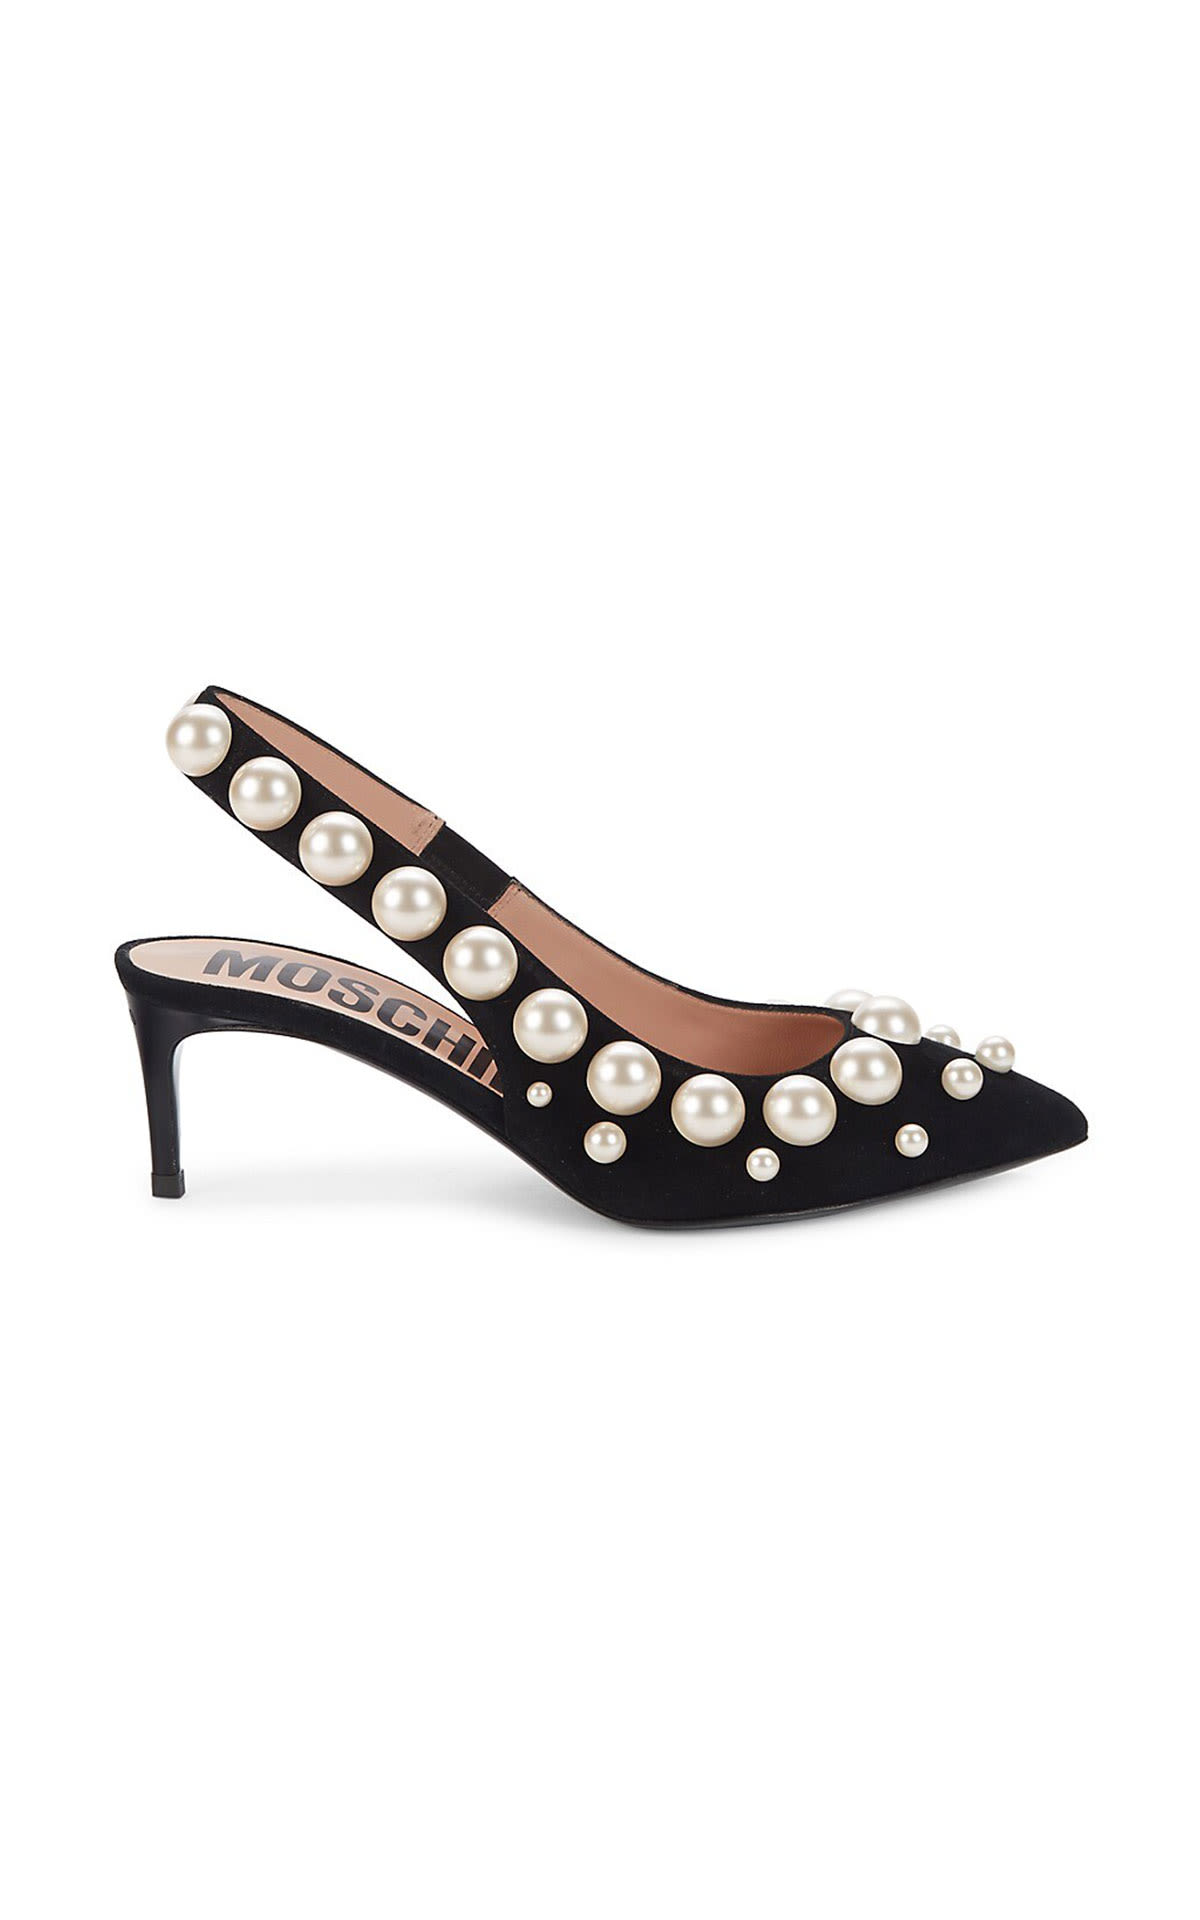 Black stiletto heel sandal with embellished pearls Moschino